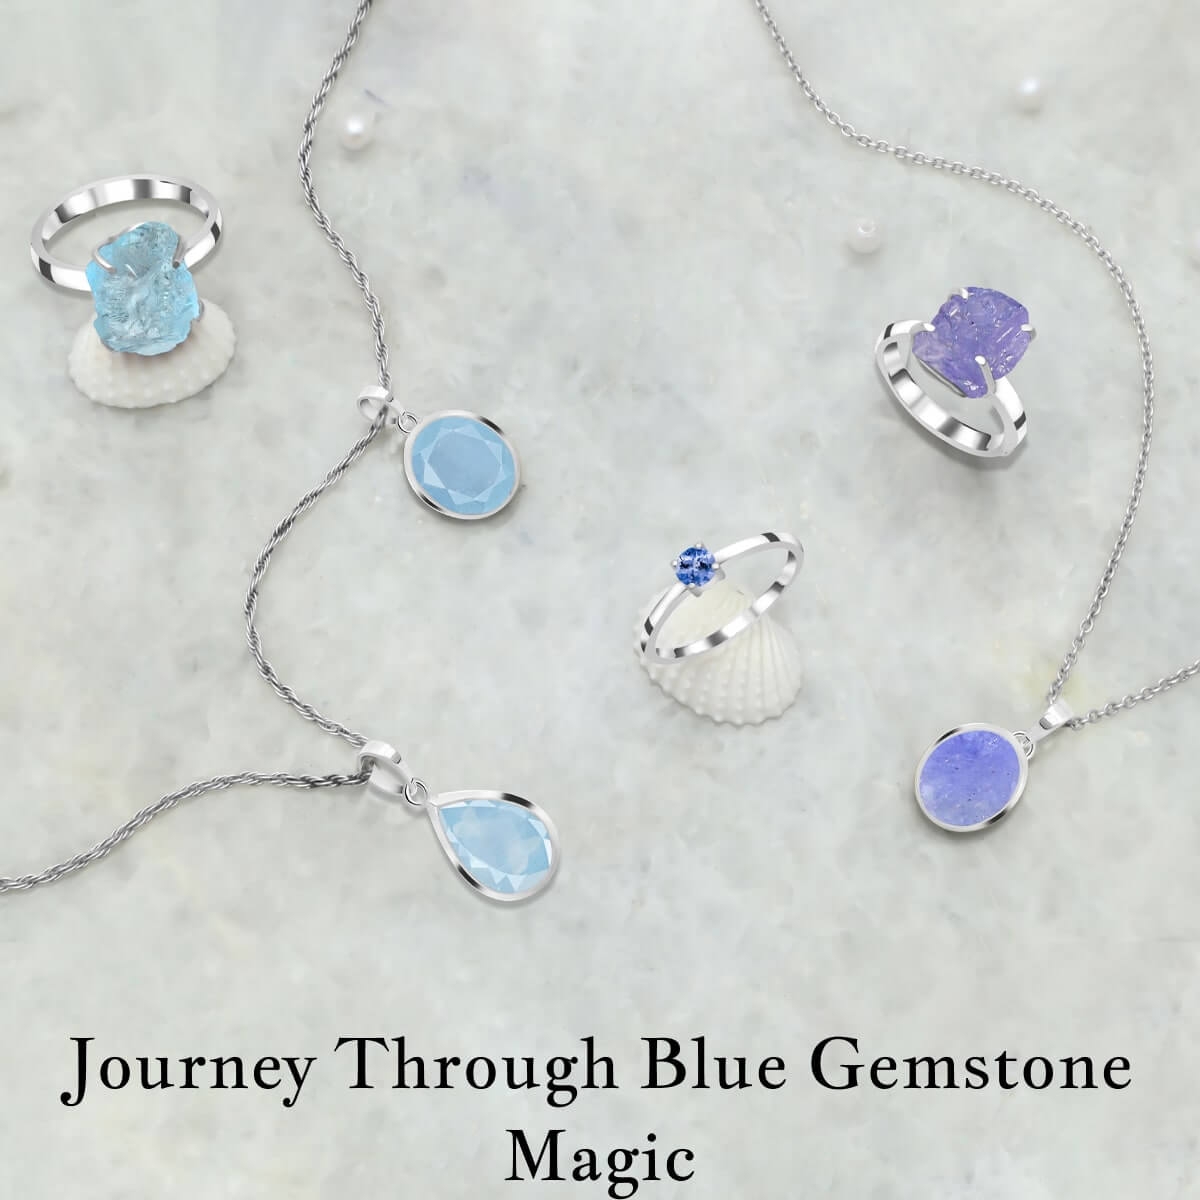 Blue Gemstones: History And More